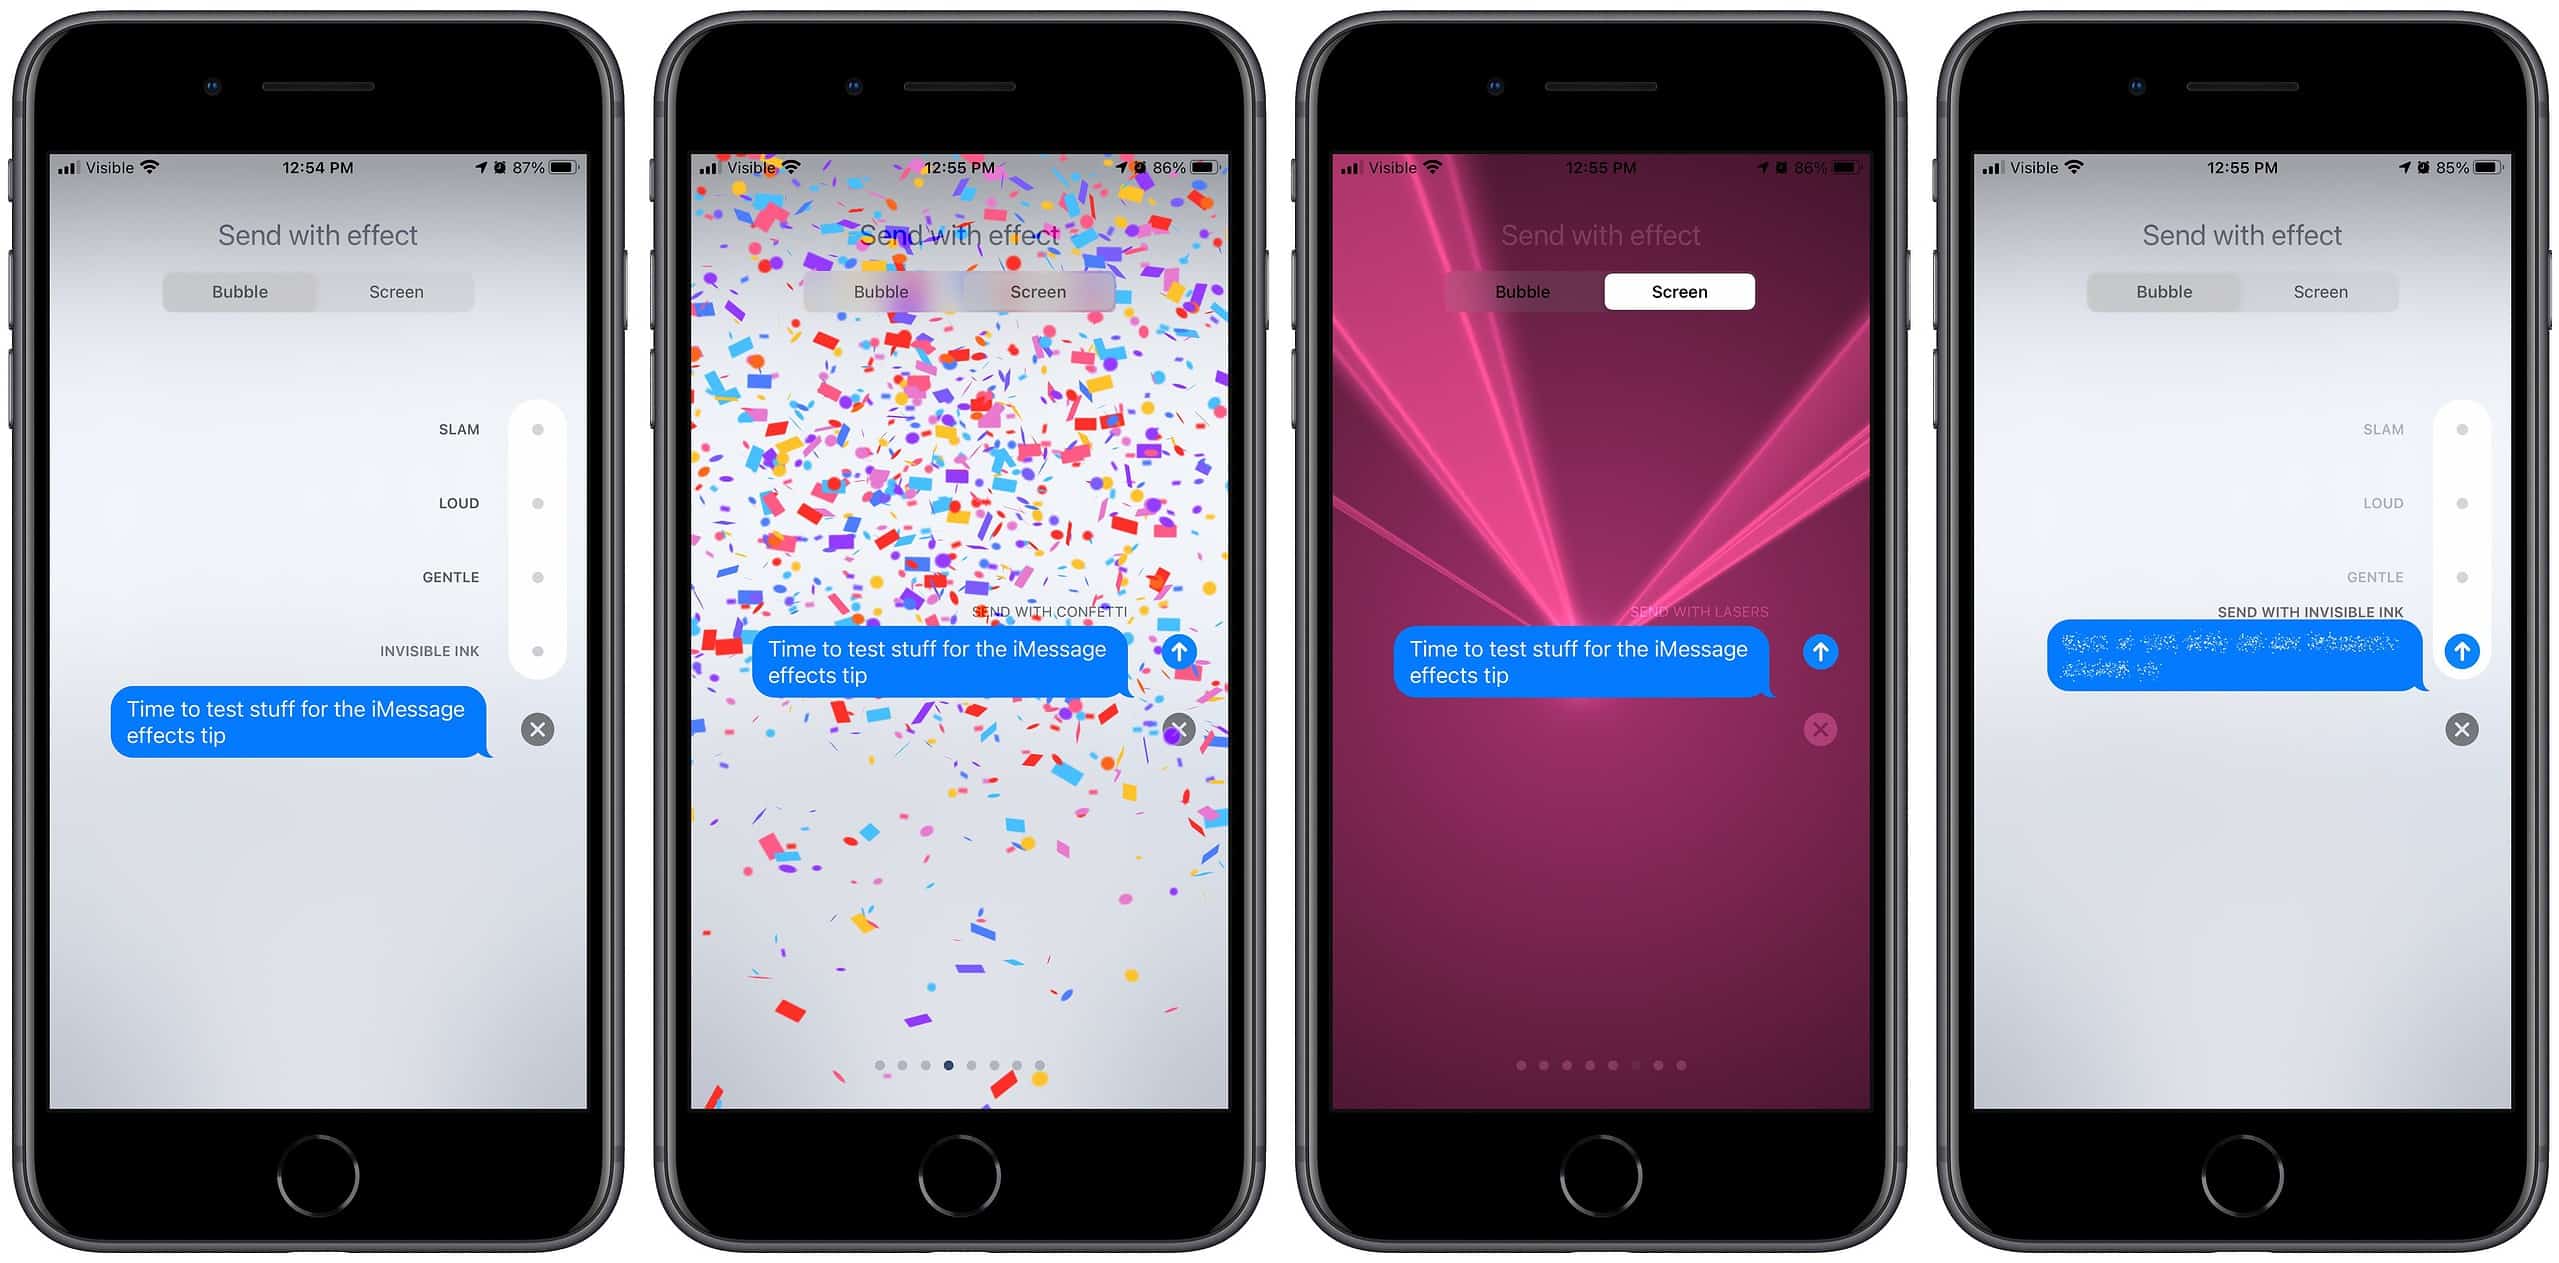 Here Are All The Message Effects You Can Send on Apple Devices